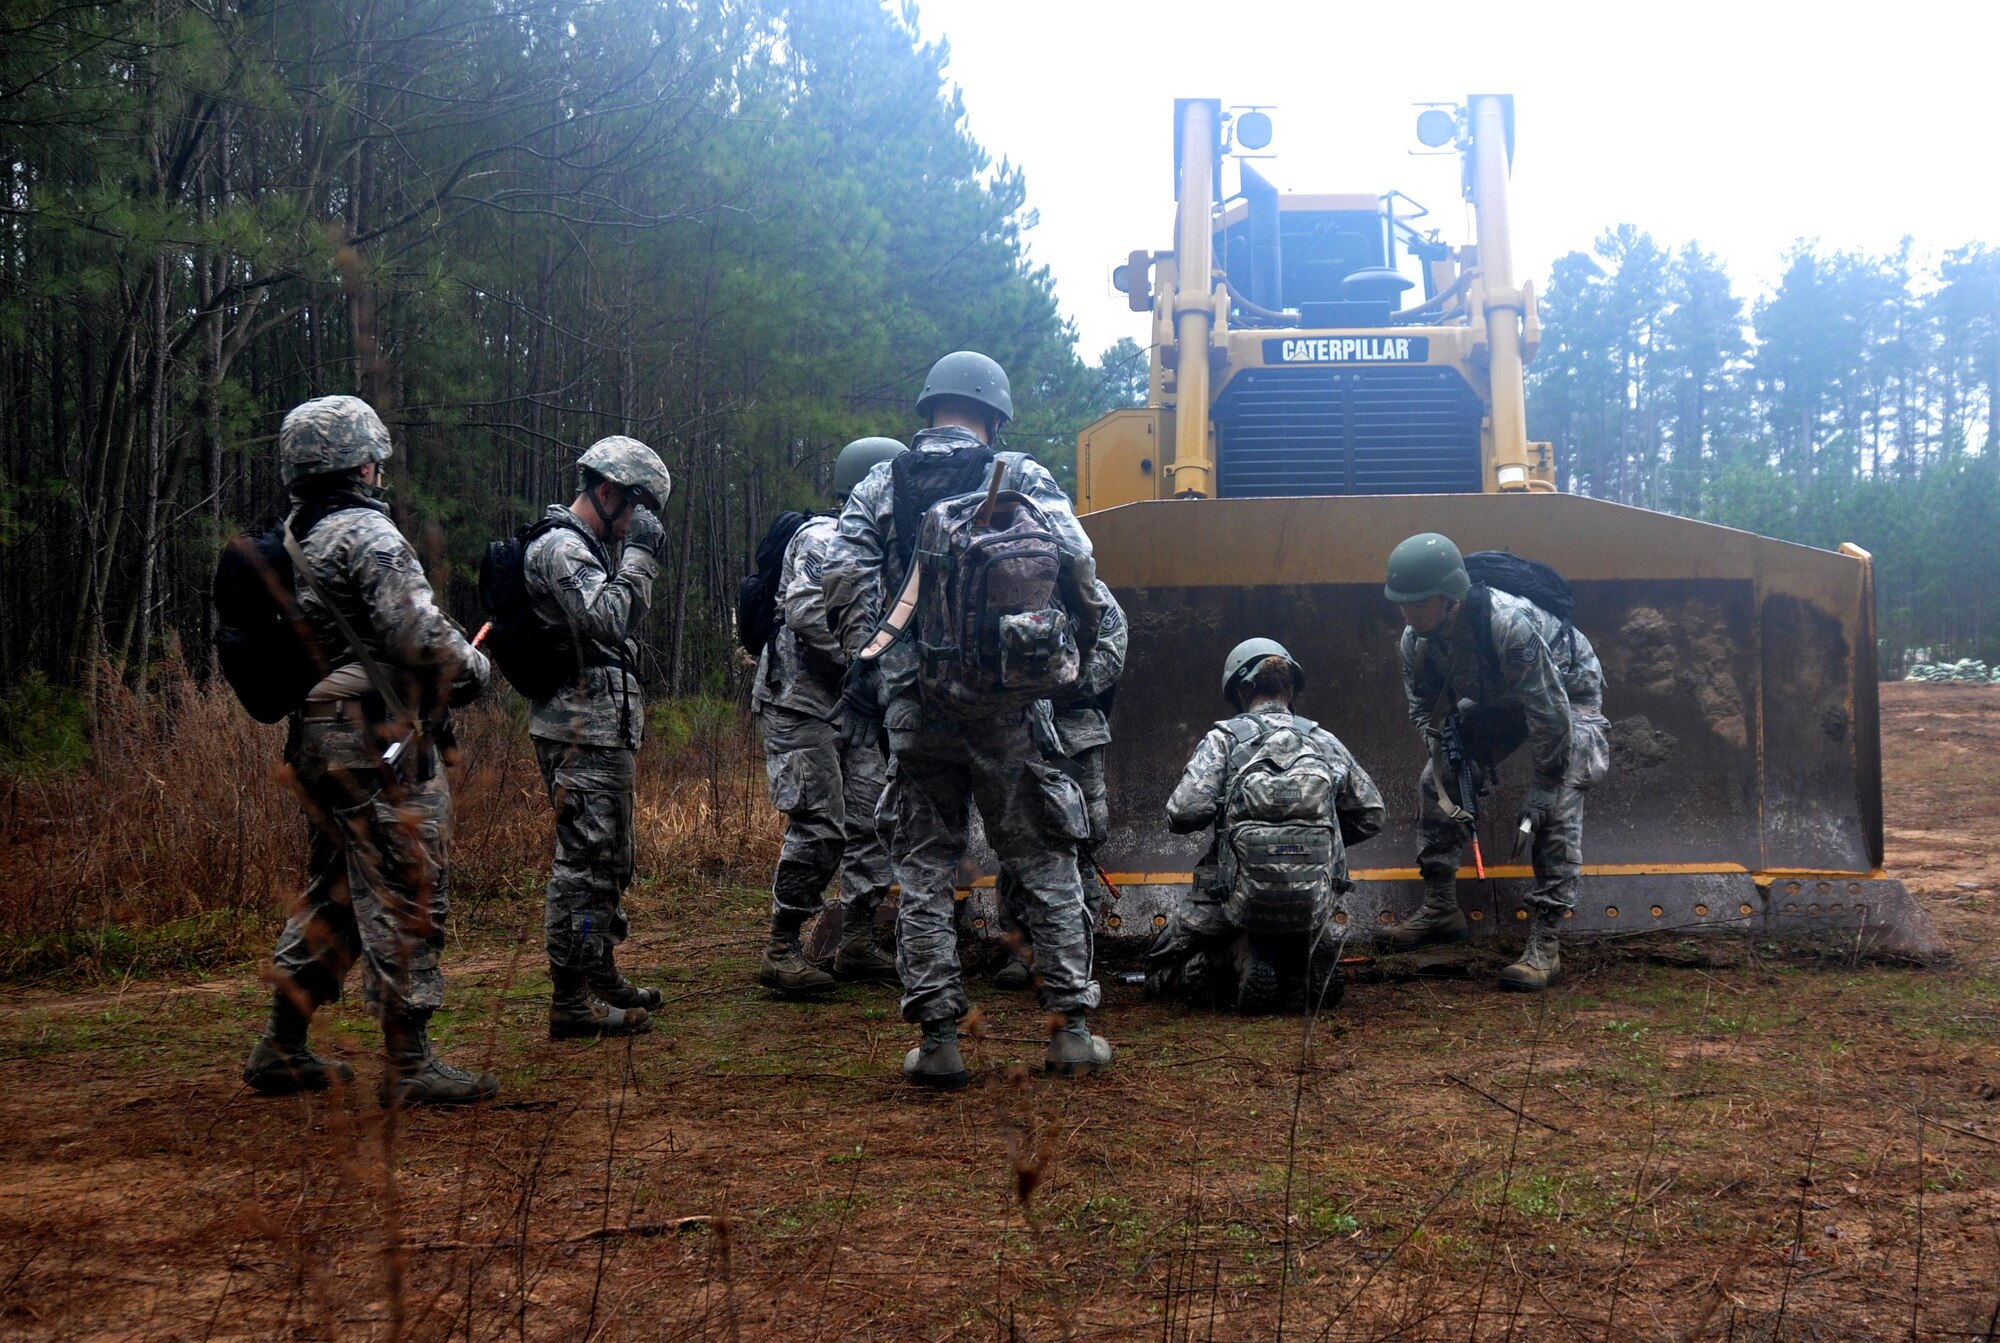 Airmen from the 911th Force Support Squadron, Pittsburgh, Pa., react to an attack by taking cover behind a bulldozer during OPERATION Everybody Panic as part of Force Support Silver Flag at Dobbins Air Reserve Base, Ga., March 10, 2015. Teams were tasked with engaging targets, self-aid buddy care, providing care under fire, identifying unexploded ordnances and improvised explosive devices, describing and providing the location of the UXOs and IEDs on a grid, low and high crawling, and transporting remains during this scenario. (U.S. Air Force photo/Senior Airman Daniel Phelps)